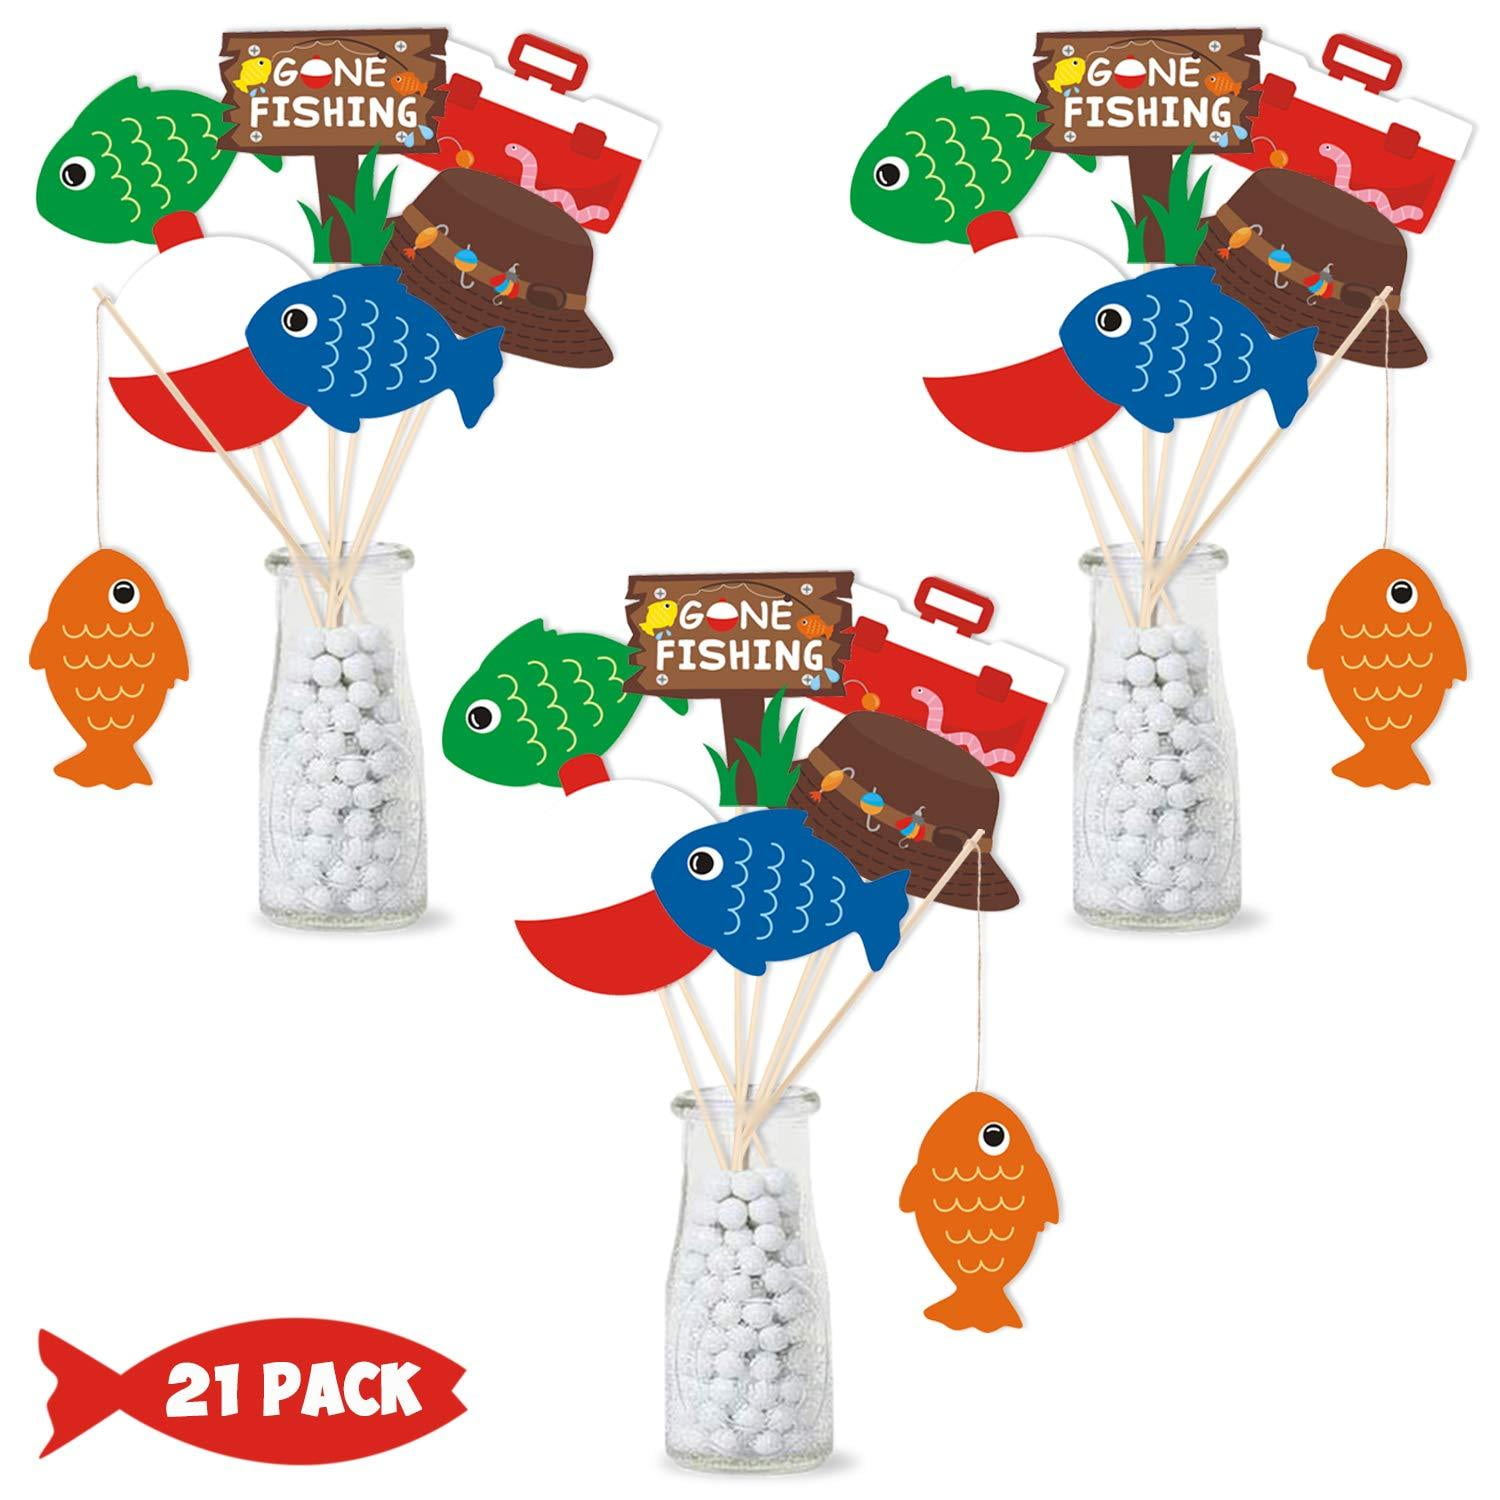 Sumind 6 Pieces Gone Fishing Party Supplies Fishing Centerpieces Birthday  Party Supplies 3D Fishing Decorations Paper Signs for Summer Little